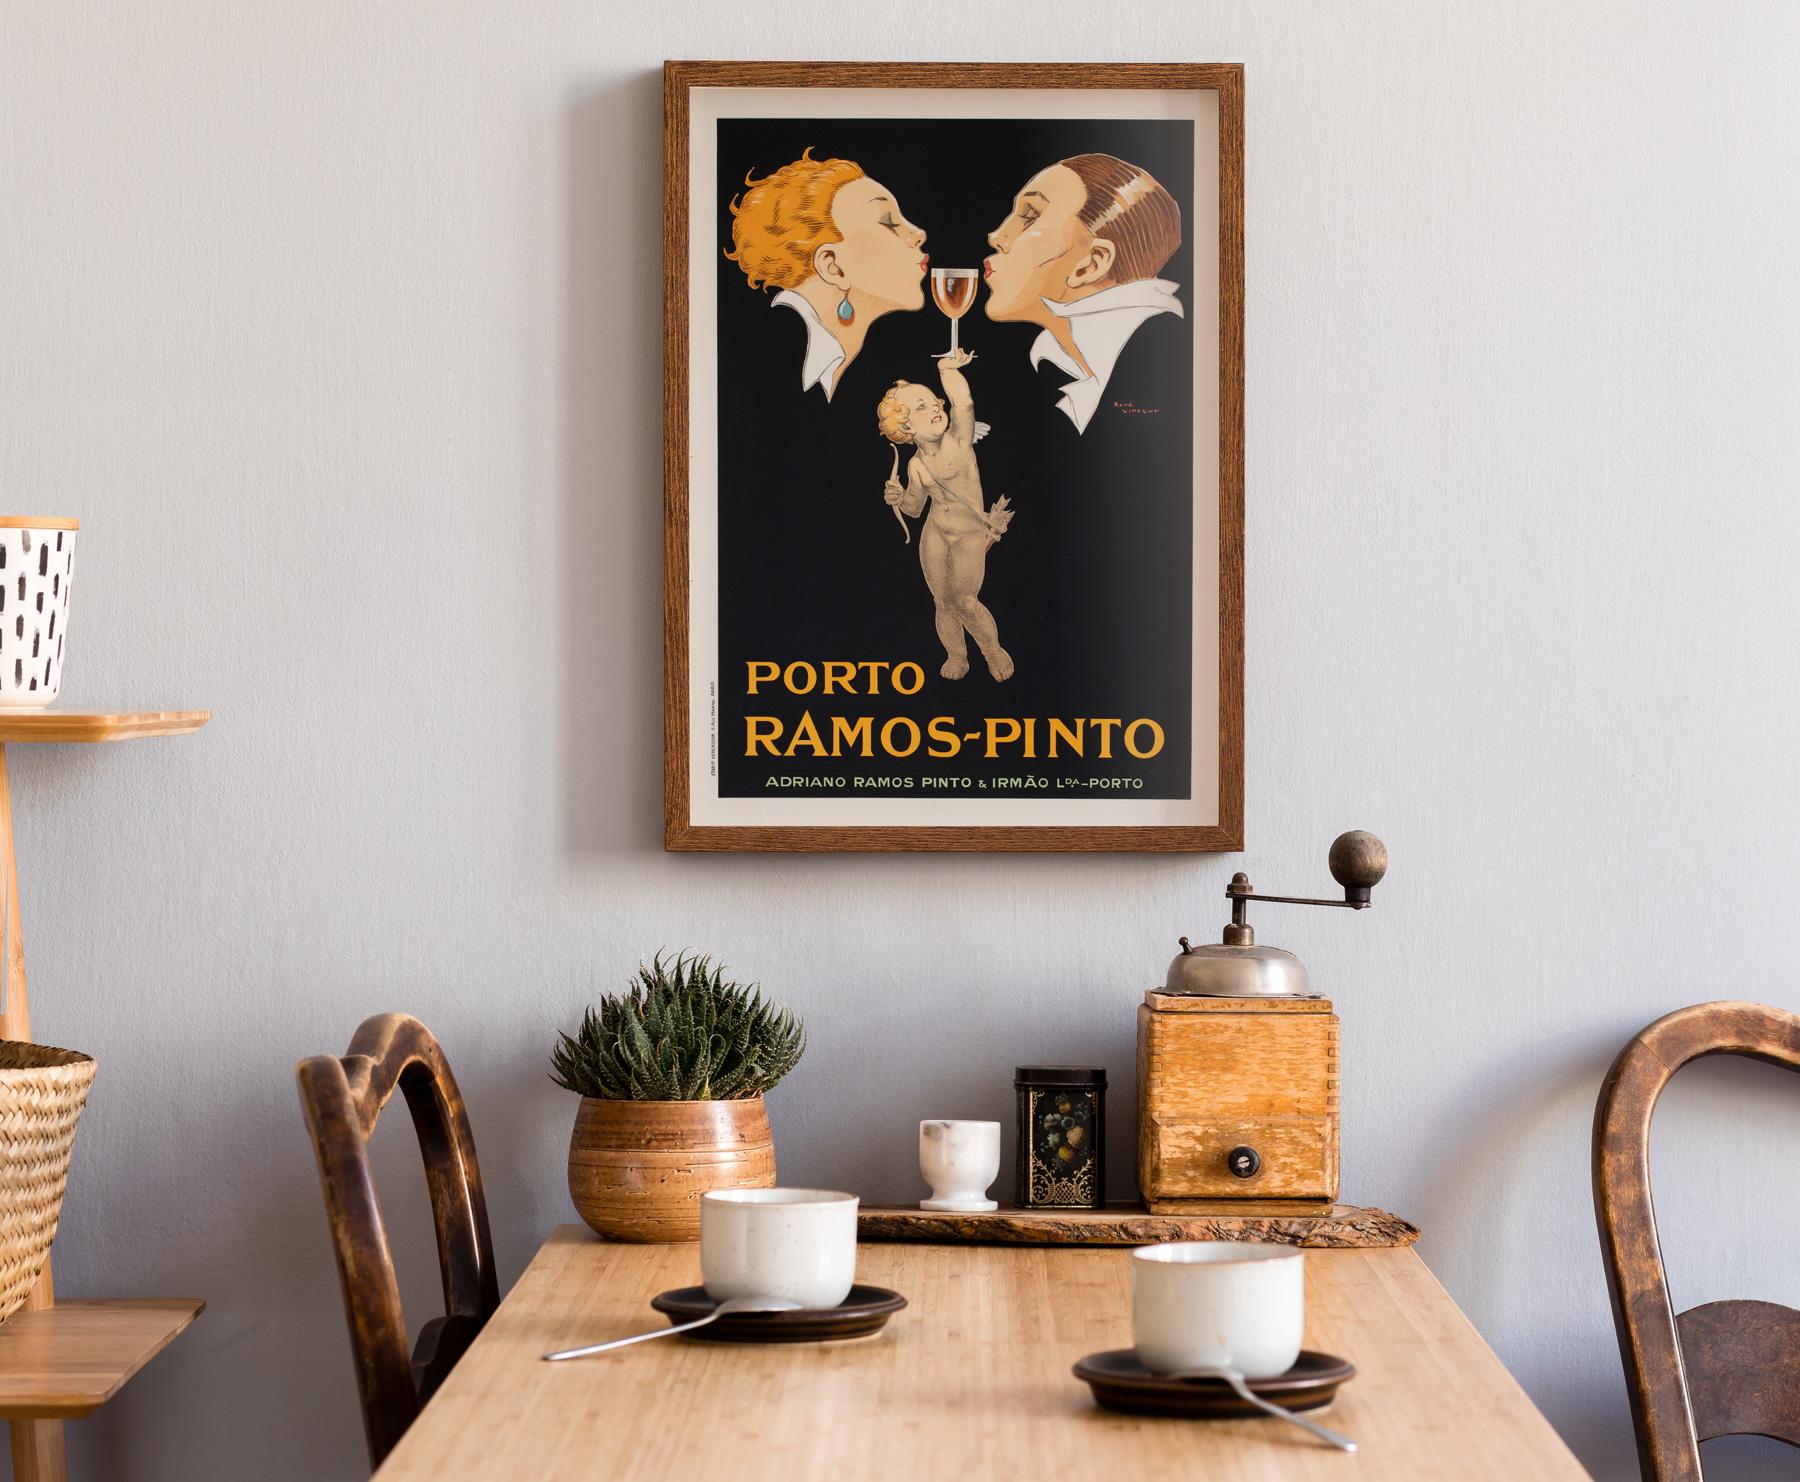 Original vintage French Porto Ramos advertising poster from circa 1920. Founded by Adriano Ramos Pinto in 1880, Casa Ramos Pinto soon made itself known for its innovative and pioneering strategy.

As illustrated by this poster featuring the iconic